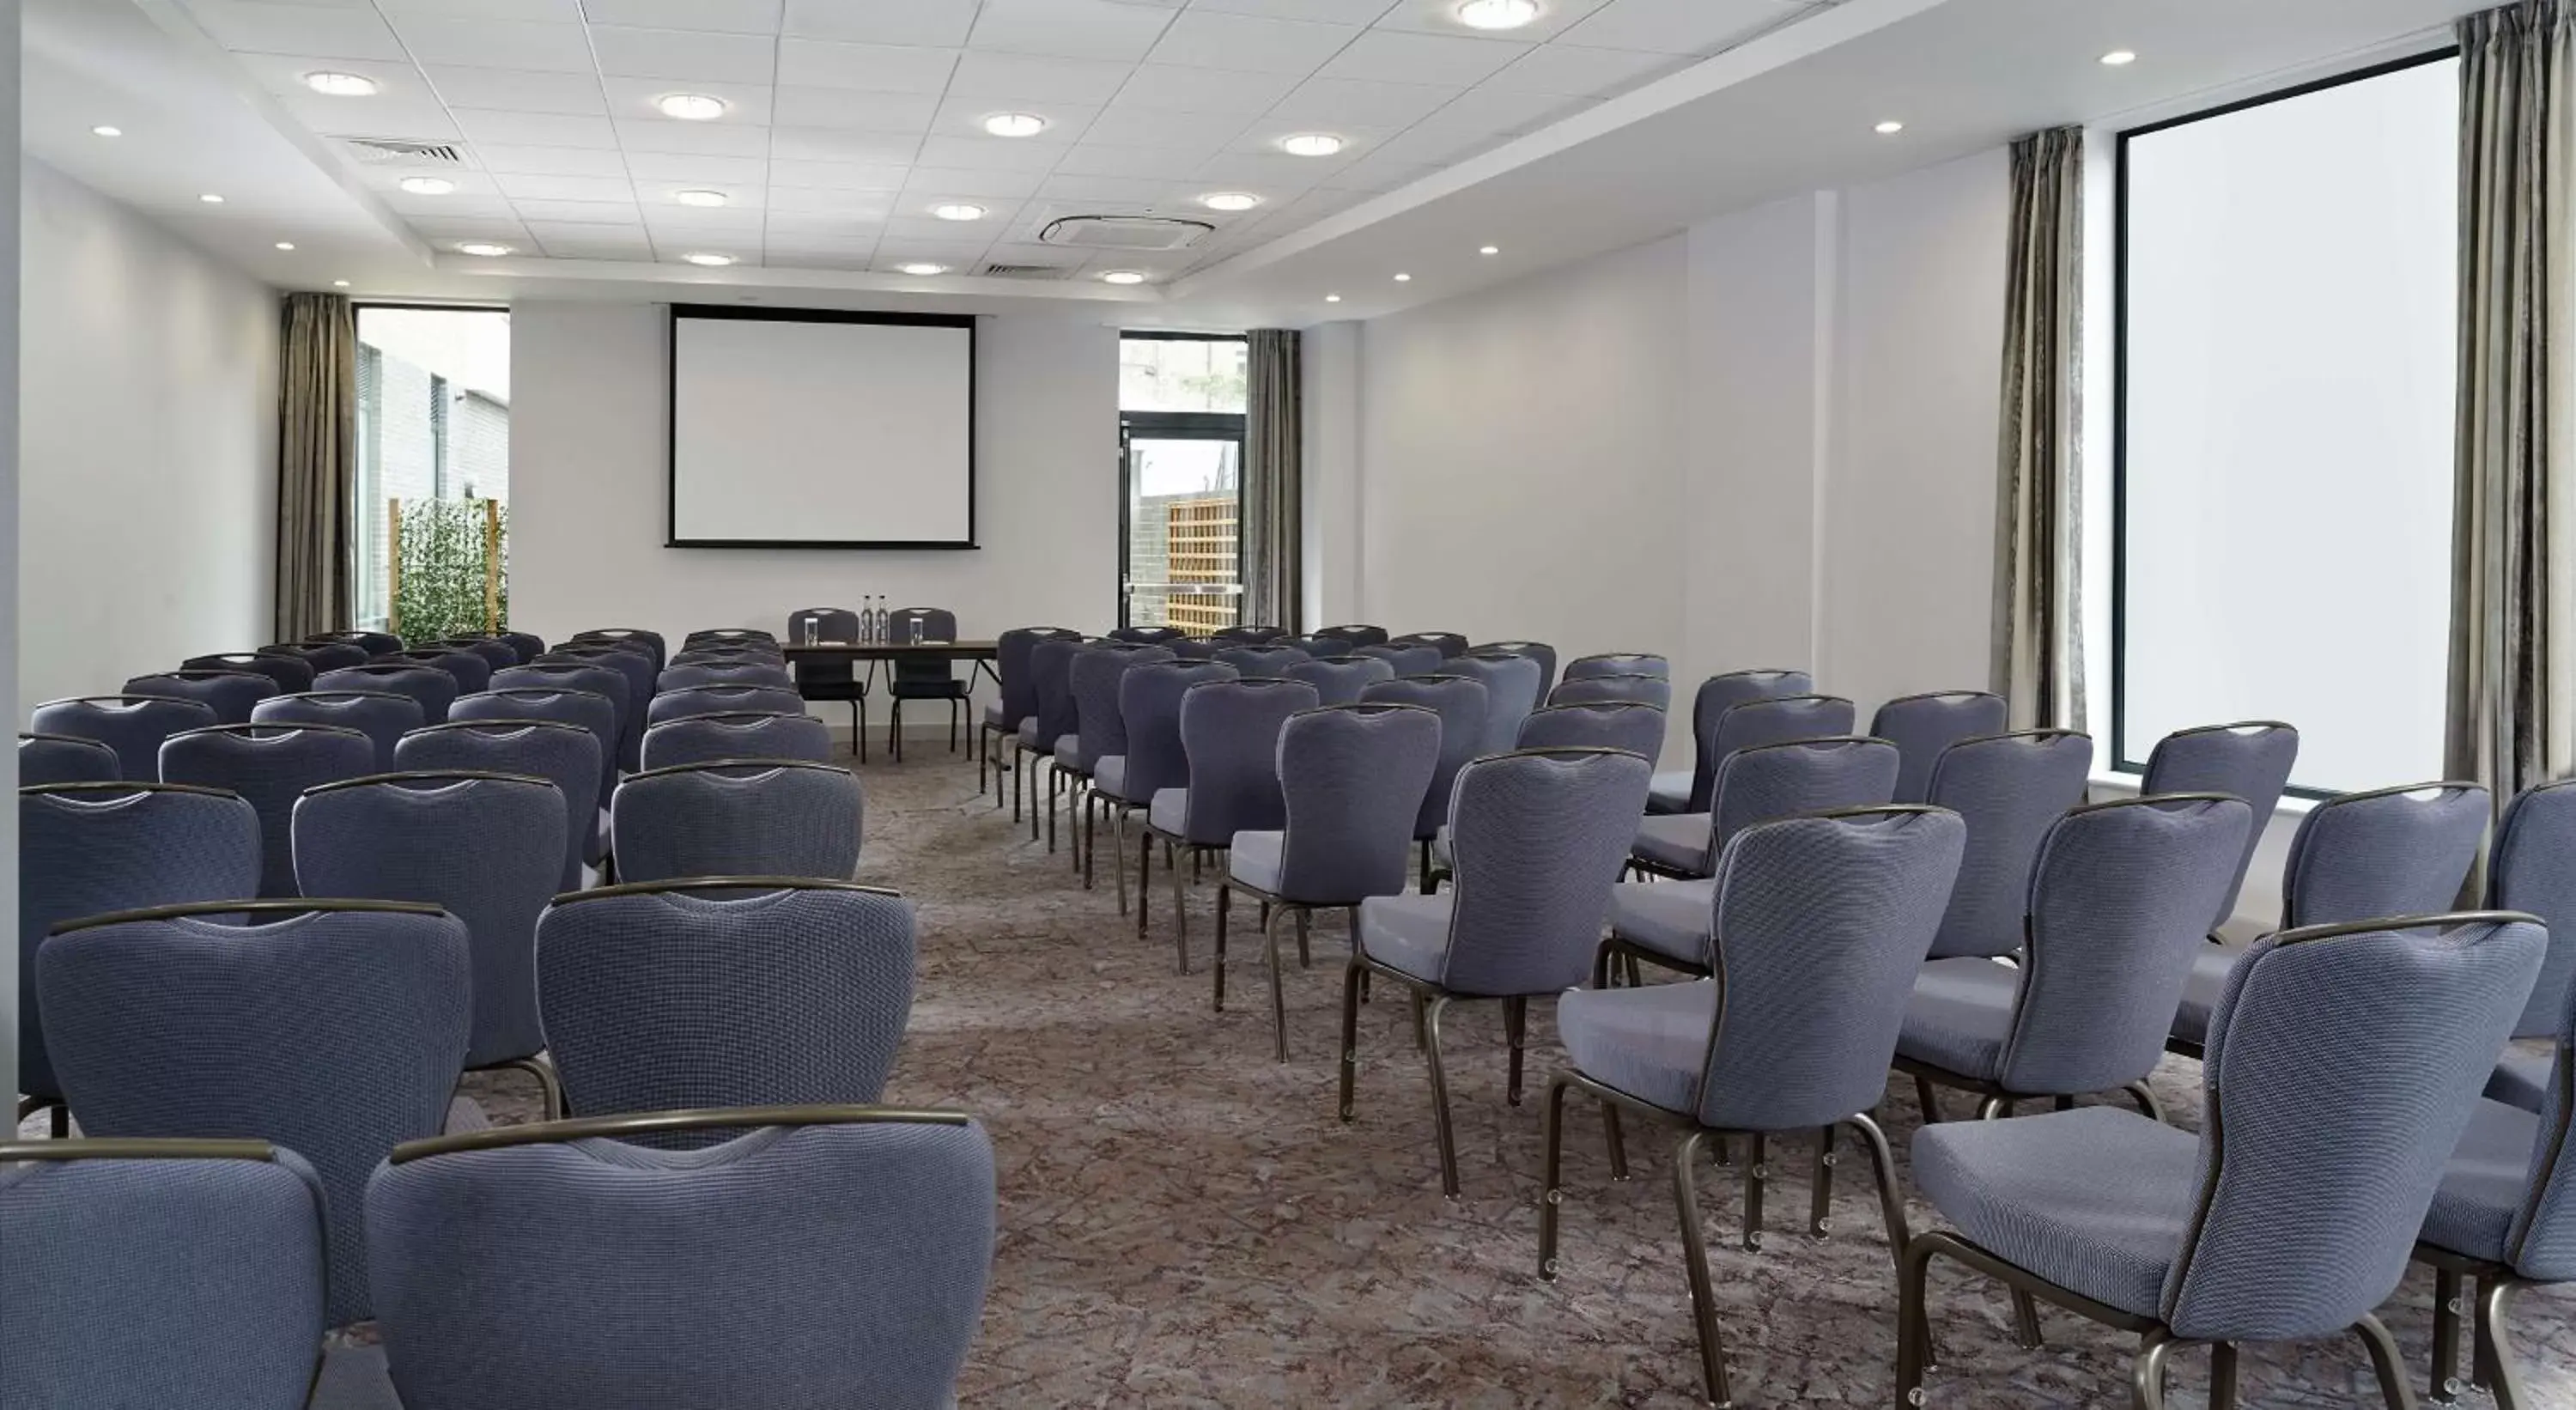 Meeting/conference room in DoubleTree by Hilton London Angel Kings Cross